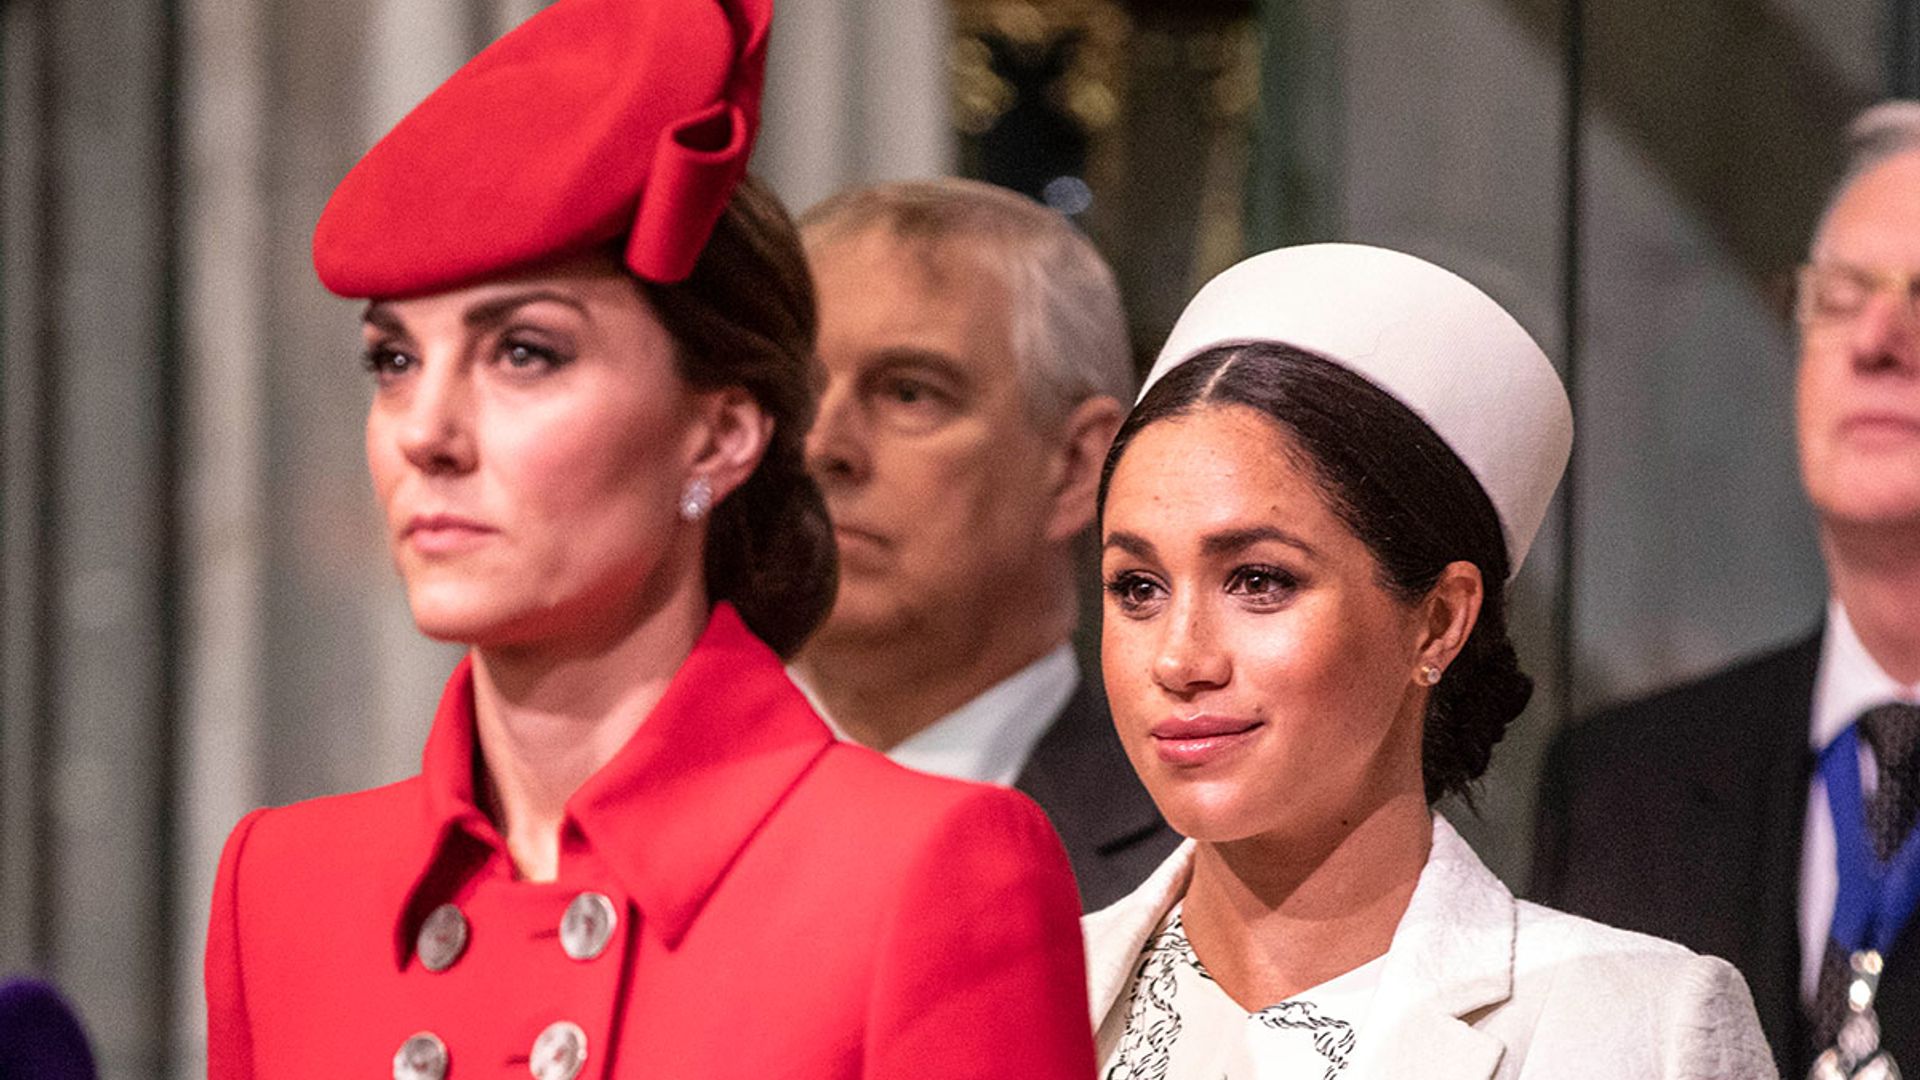 Meghan Markle reveals Kate Middleton apologised after making her cry in royal wedding lead-up